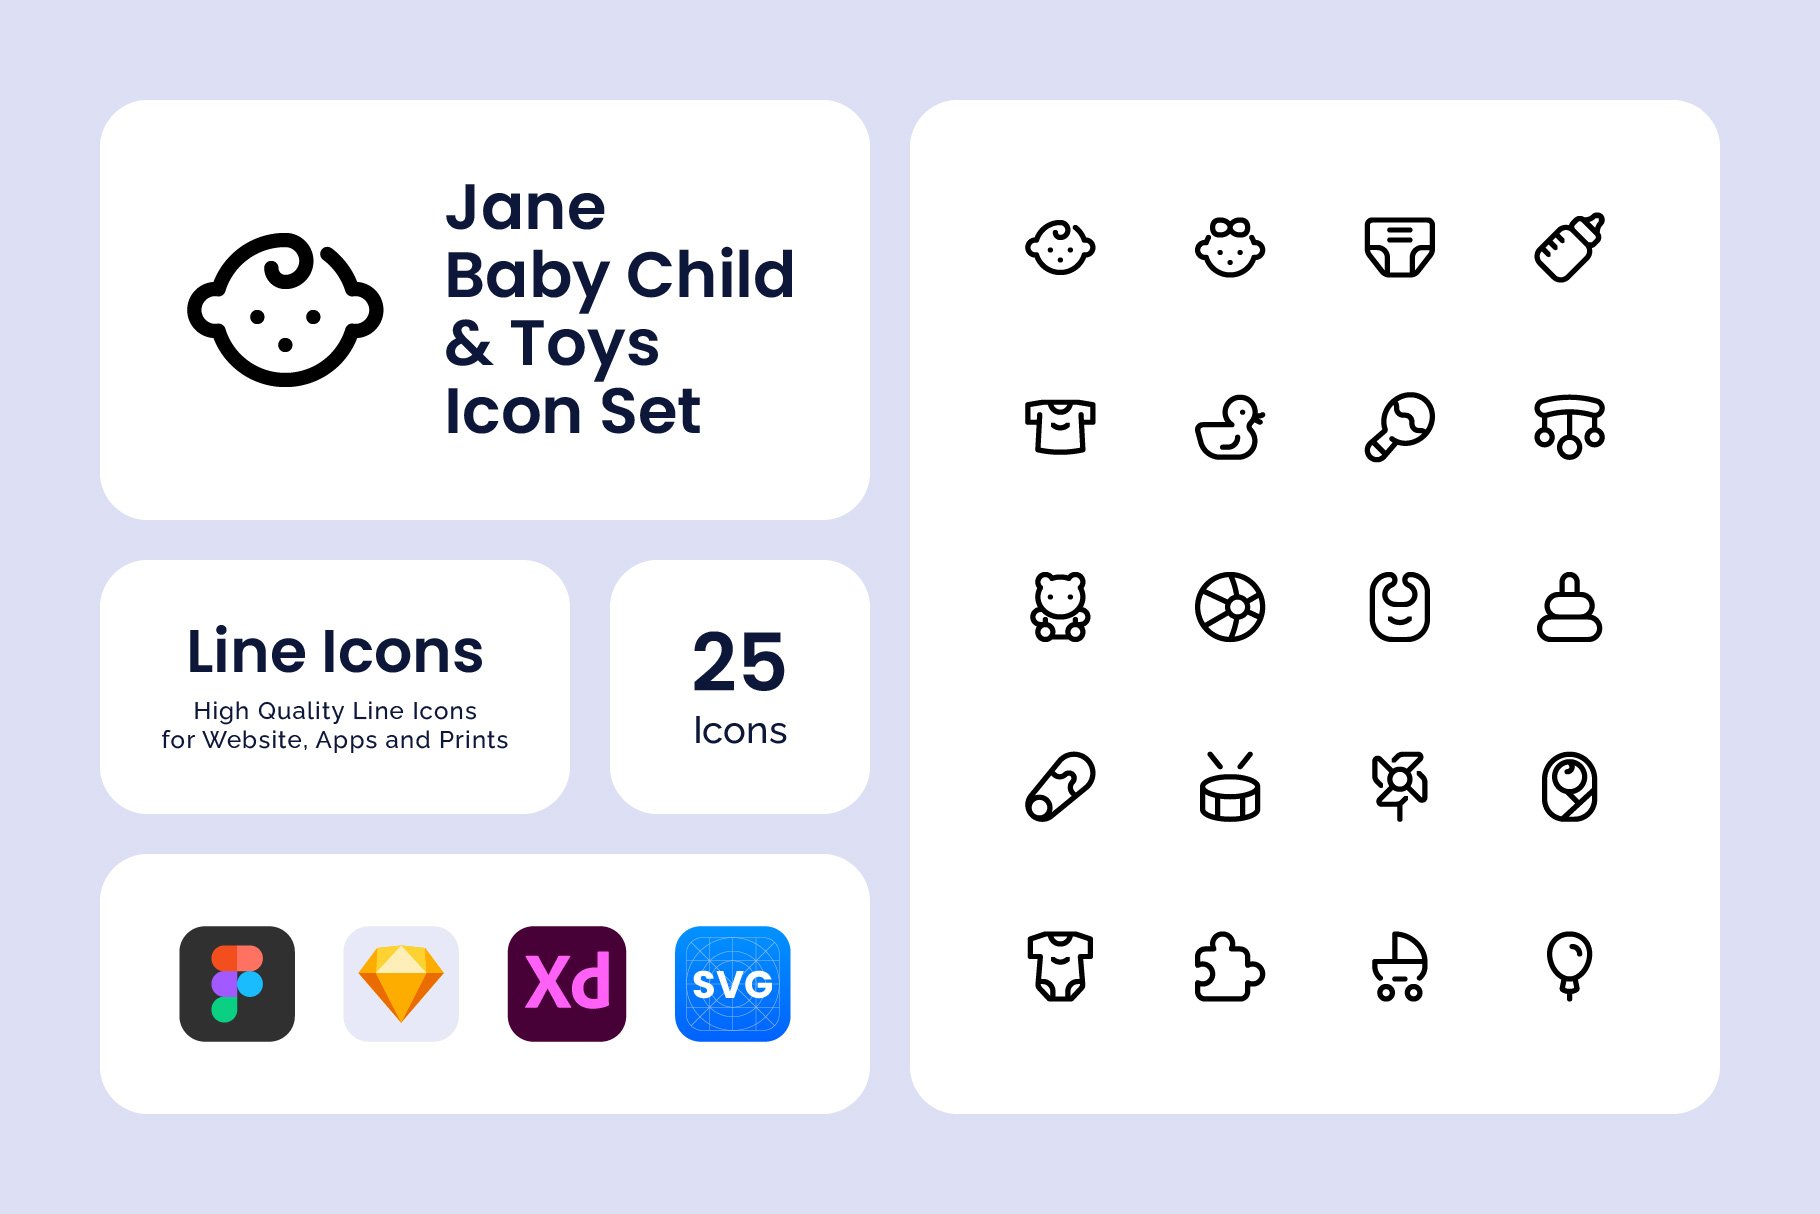 Janne - Baby Children Toys Icon Set cover image.